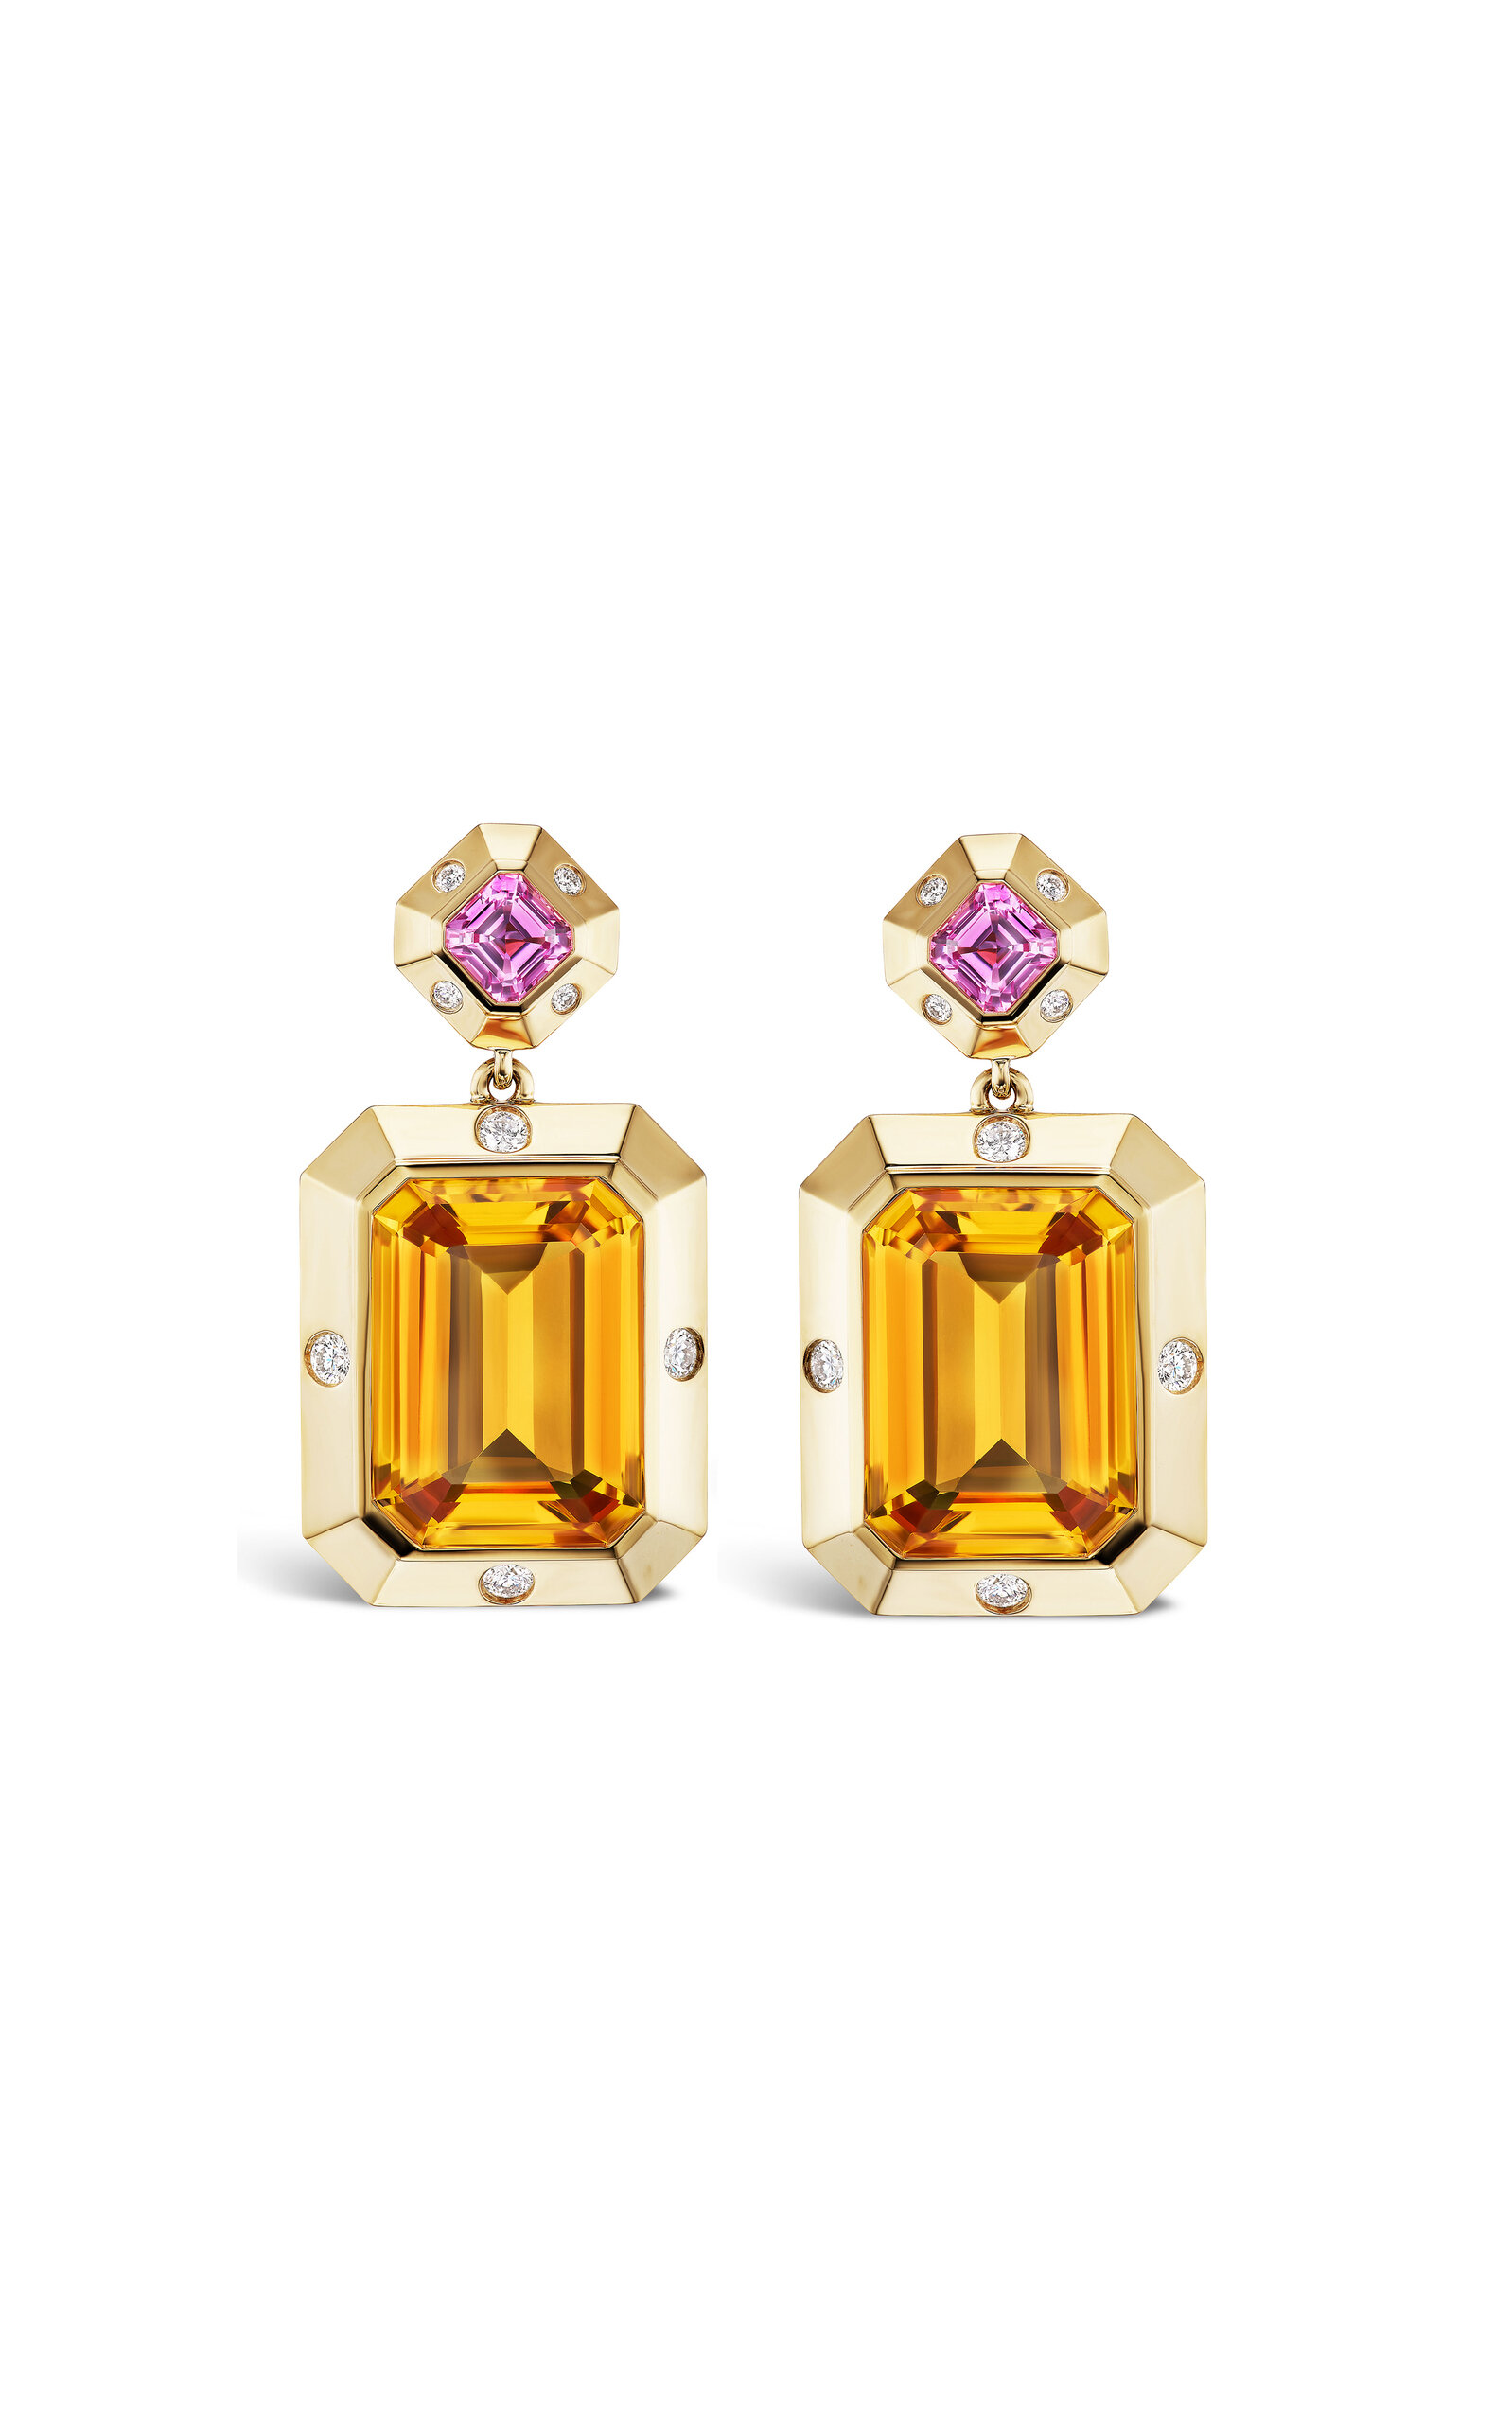 Stella 18K Yellow Gold; Sapphire and Citrine Earrings